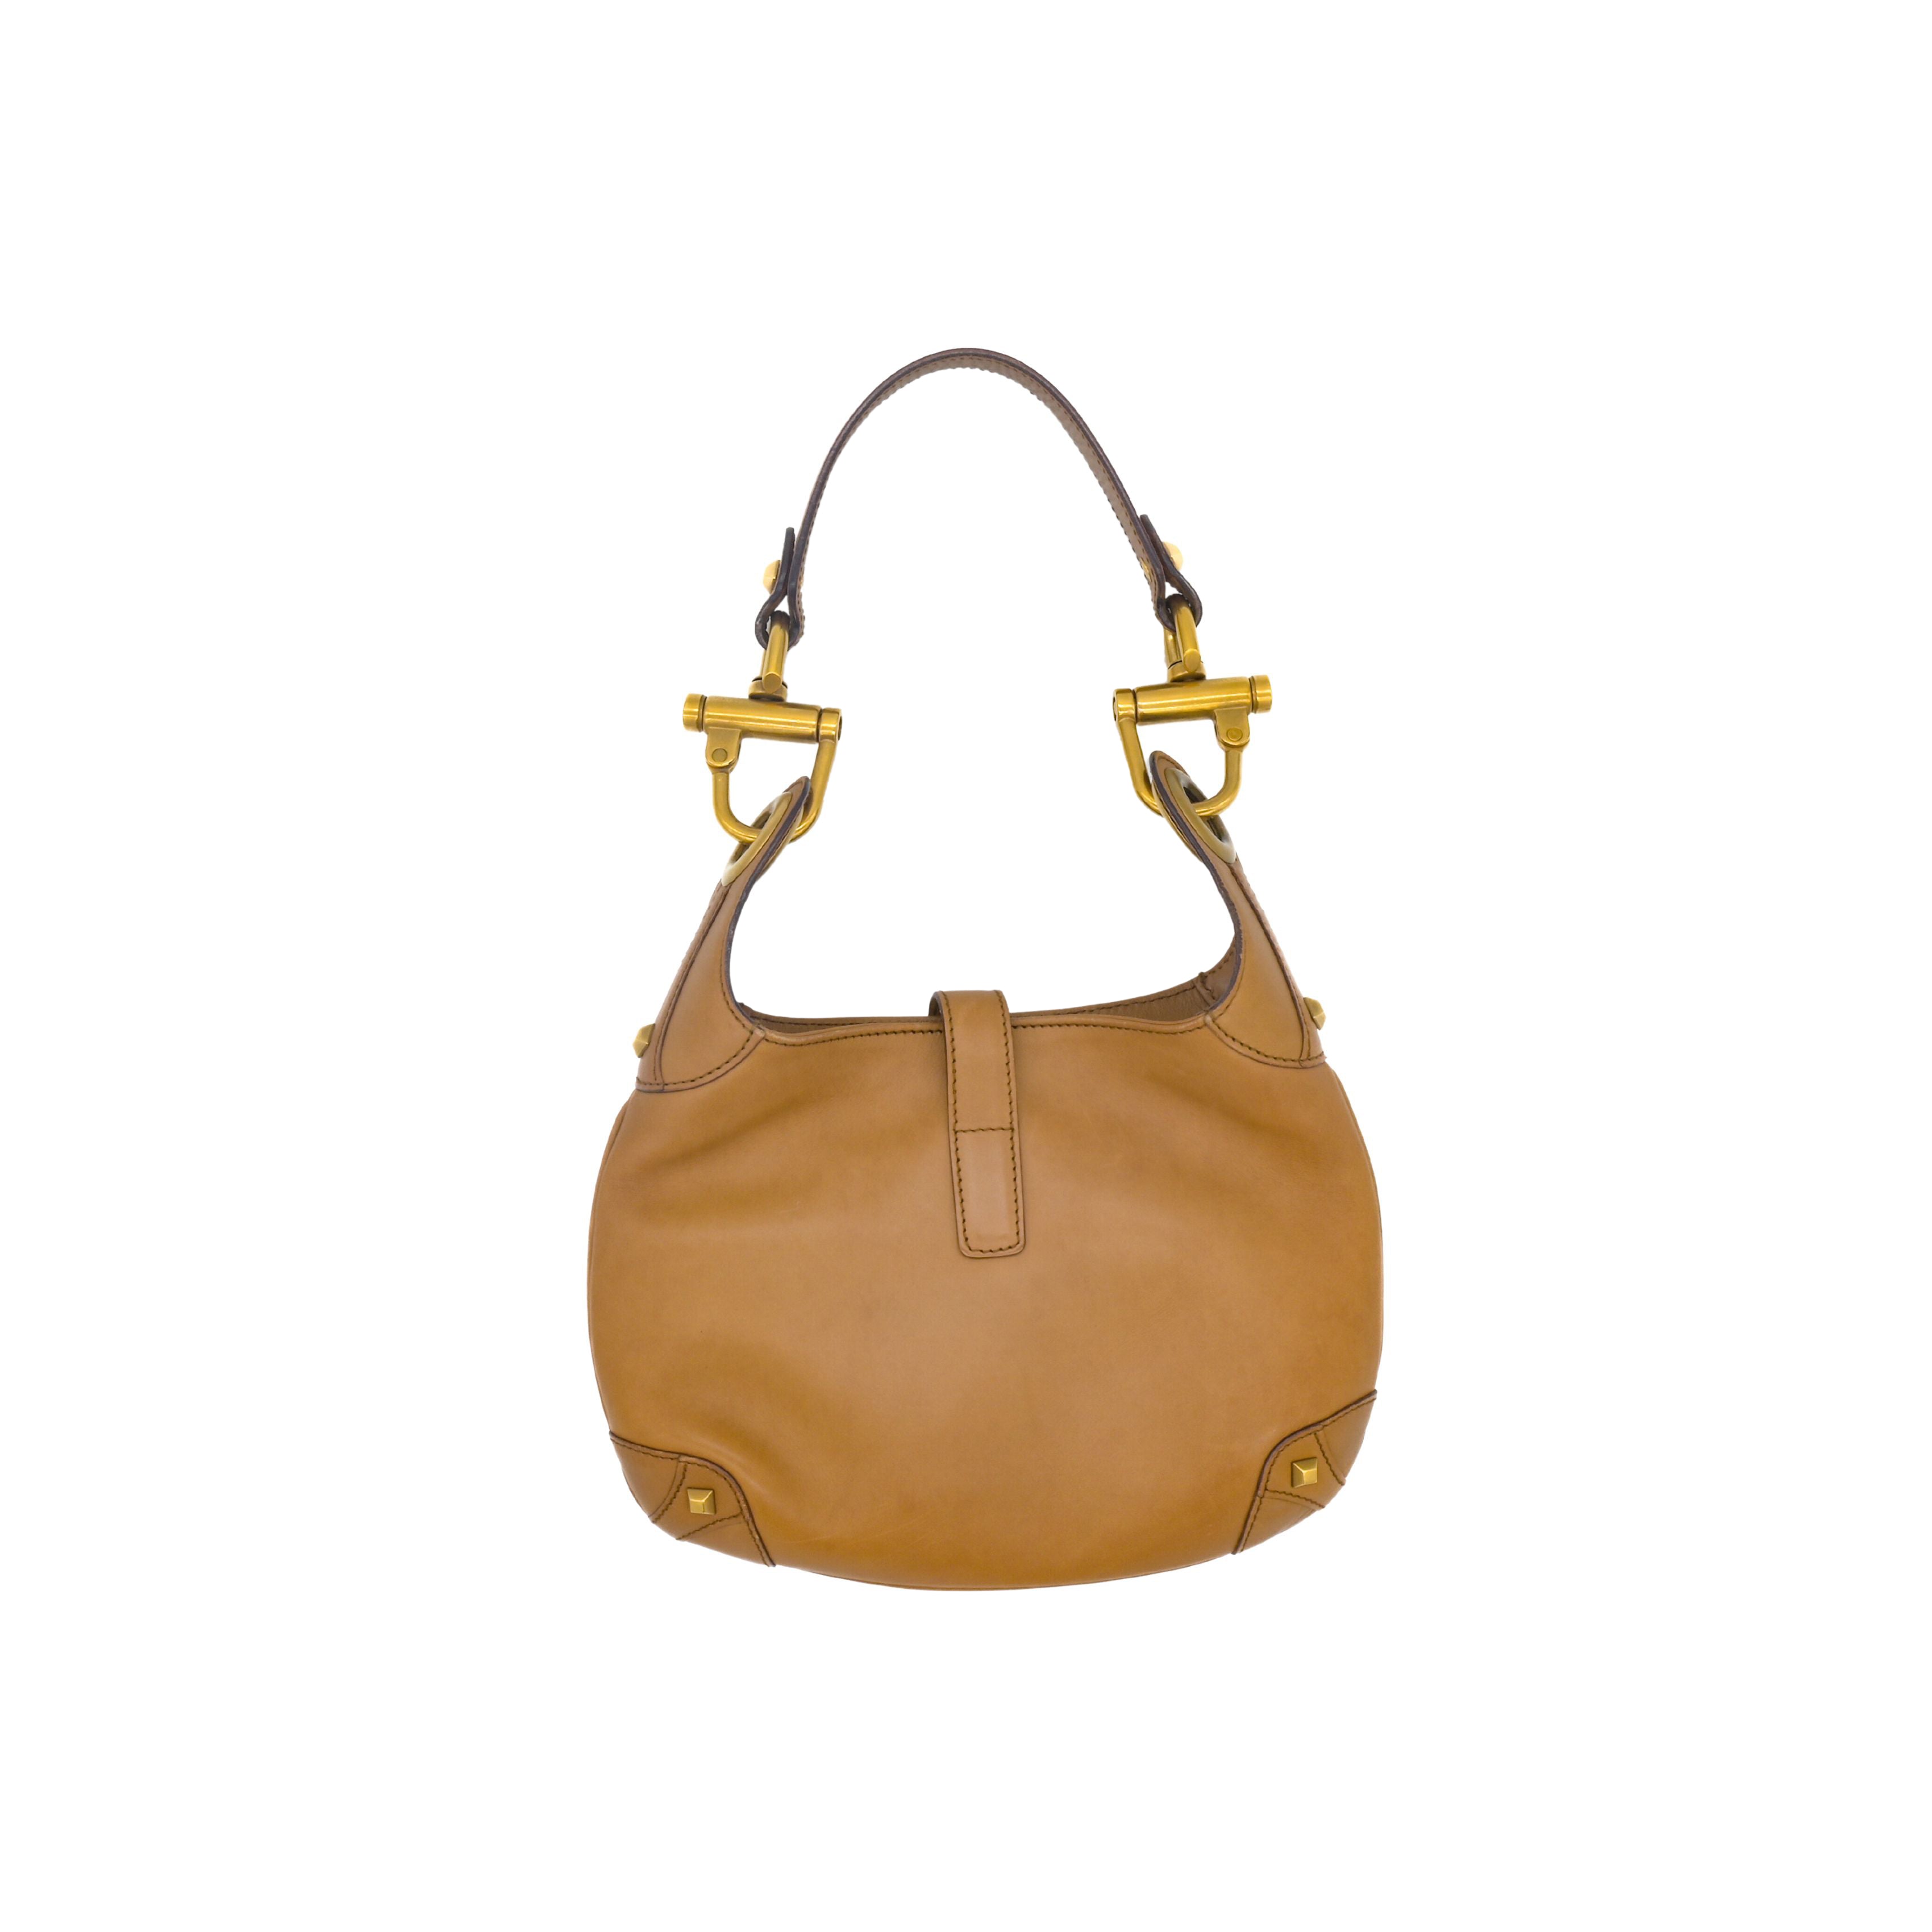 GUCCI Gucci Jackie Vintage Mini Hobo in Cognac Brown Leather (was $848) - Vault 55